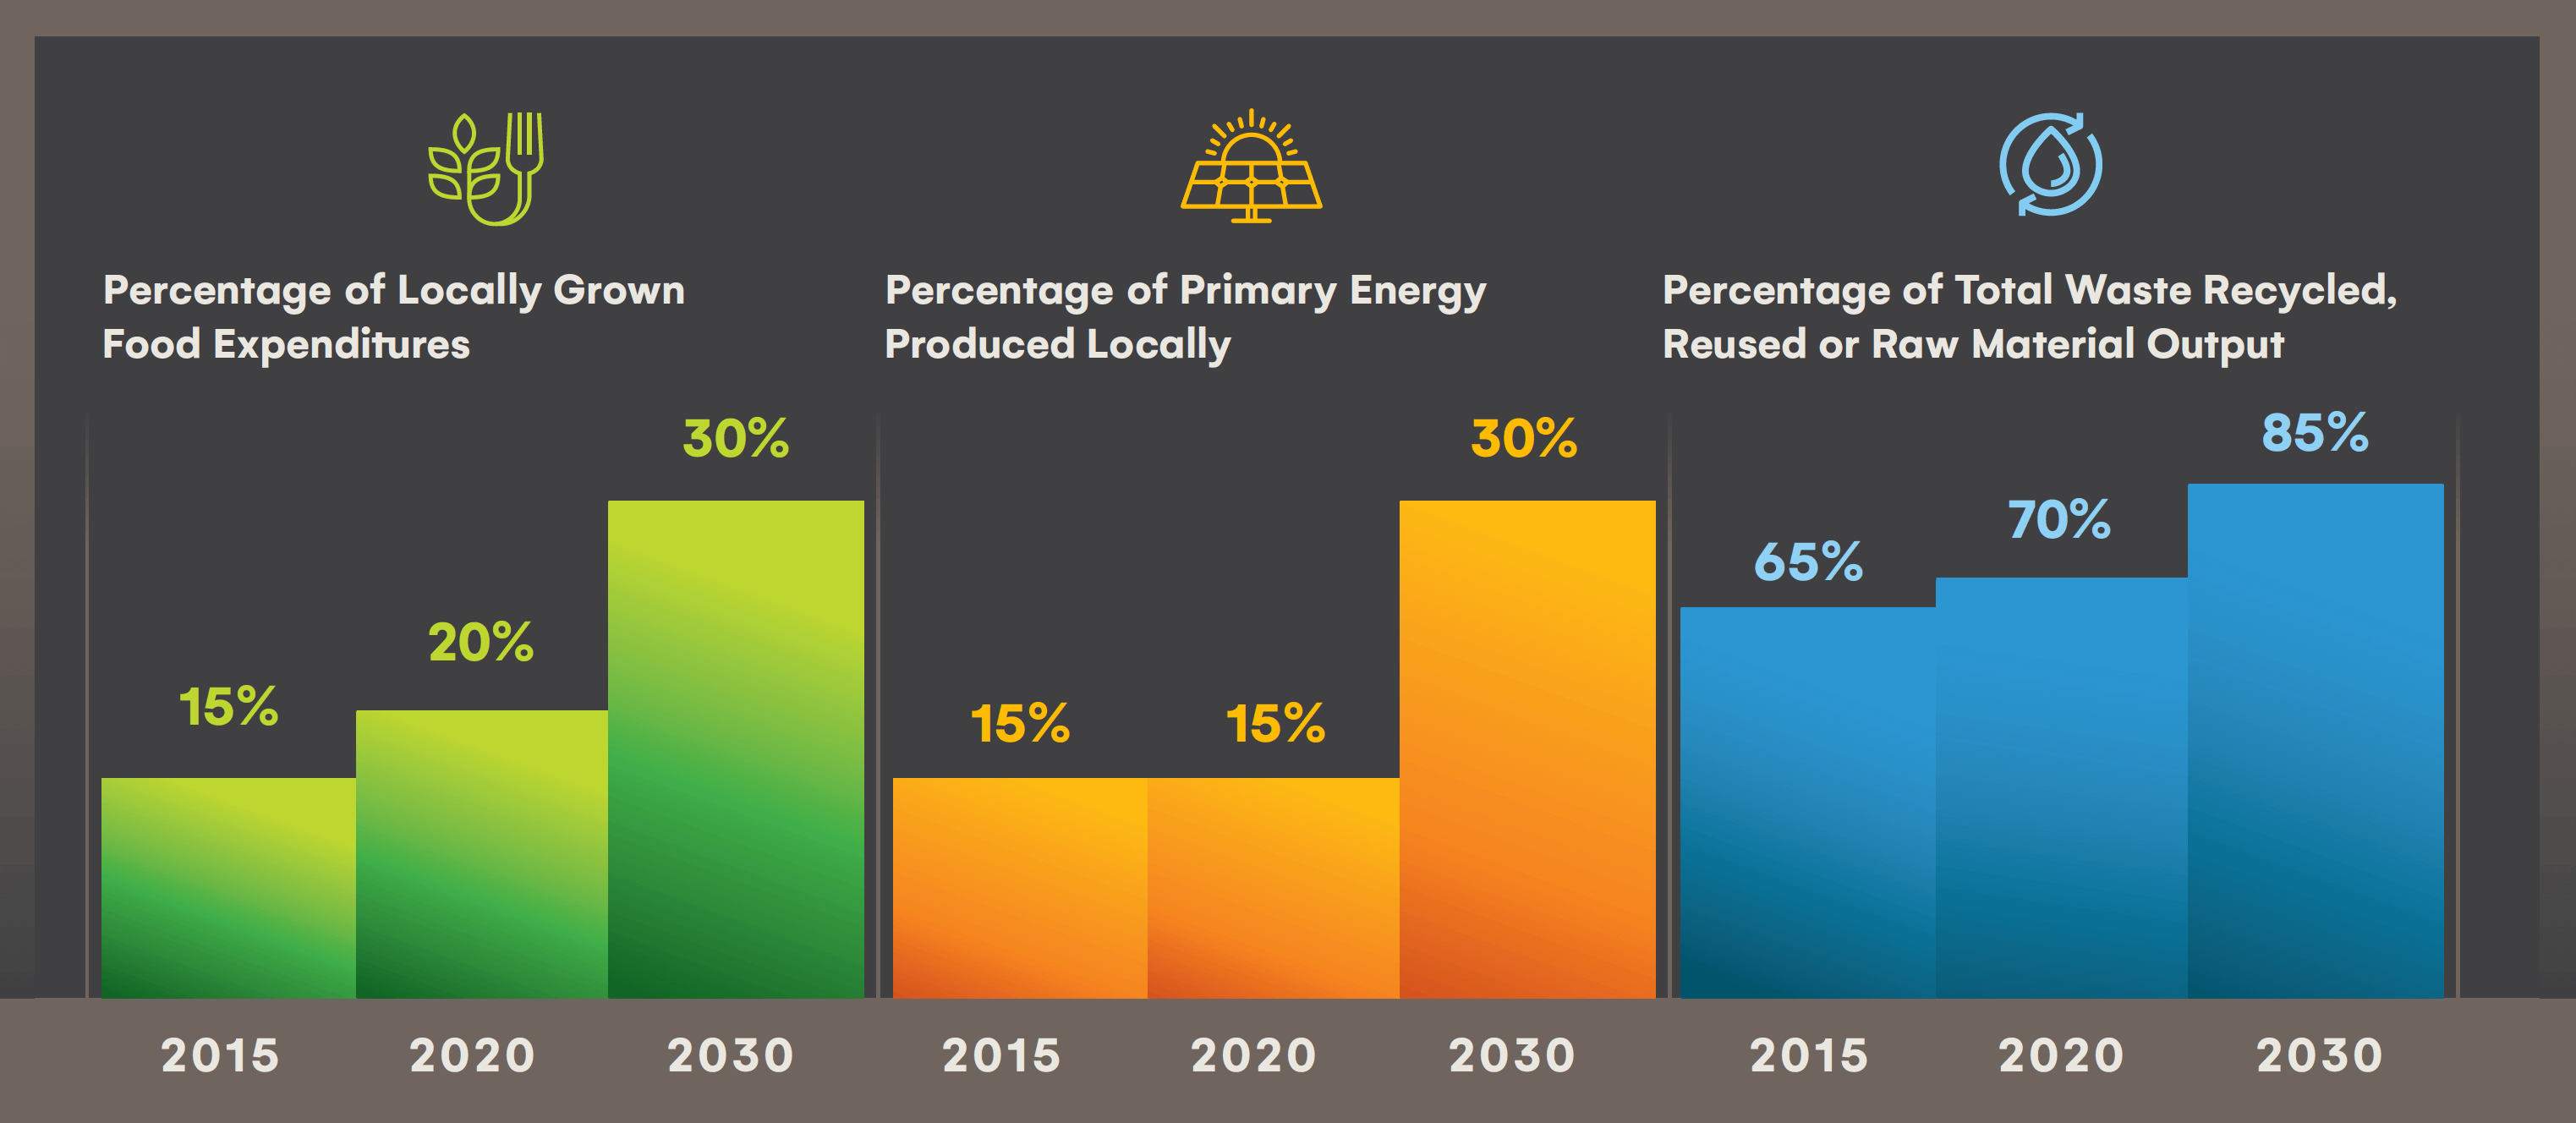 Infographic showing 2030 percentage of locally grown food expenditures projected to 30%, percentage of primary energey produced locally to 30%, and percentag4e of total waste recylced, reused, or raw material out put to 85%